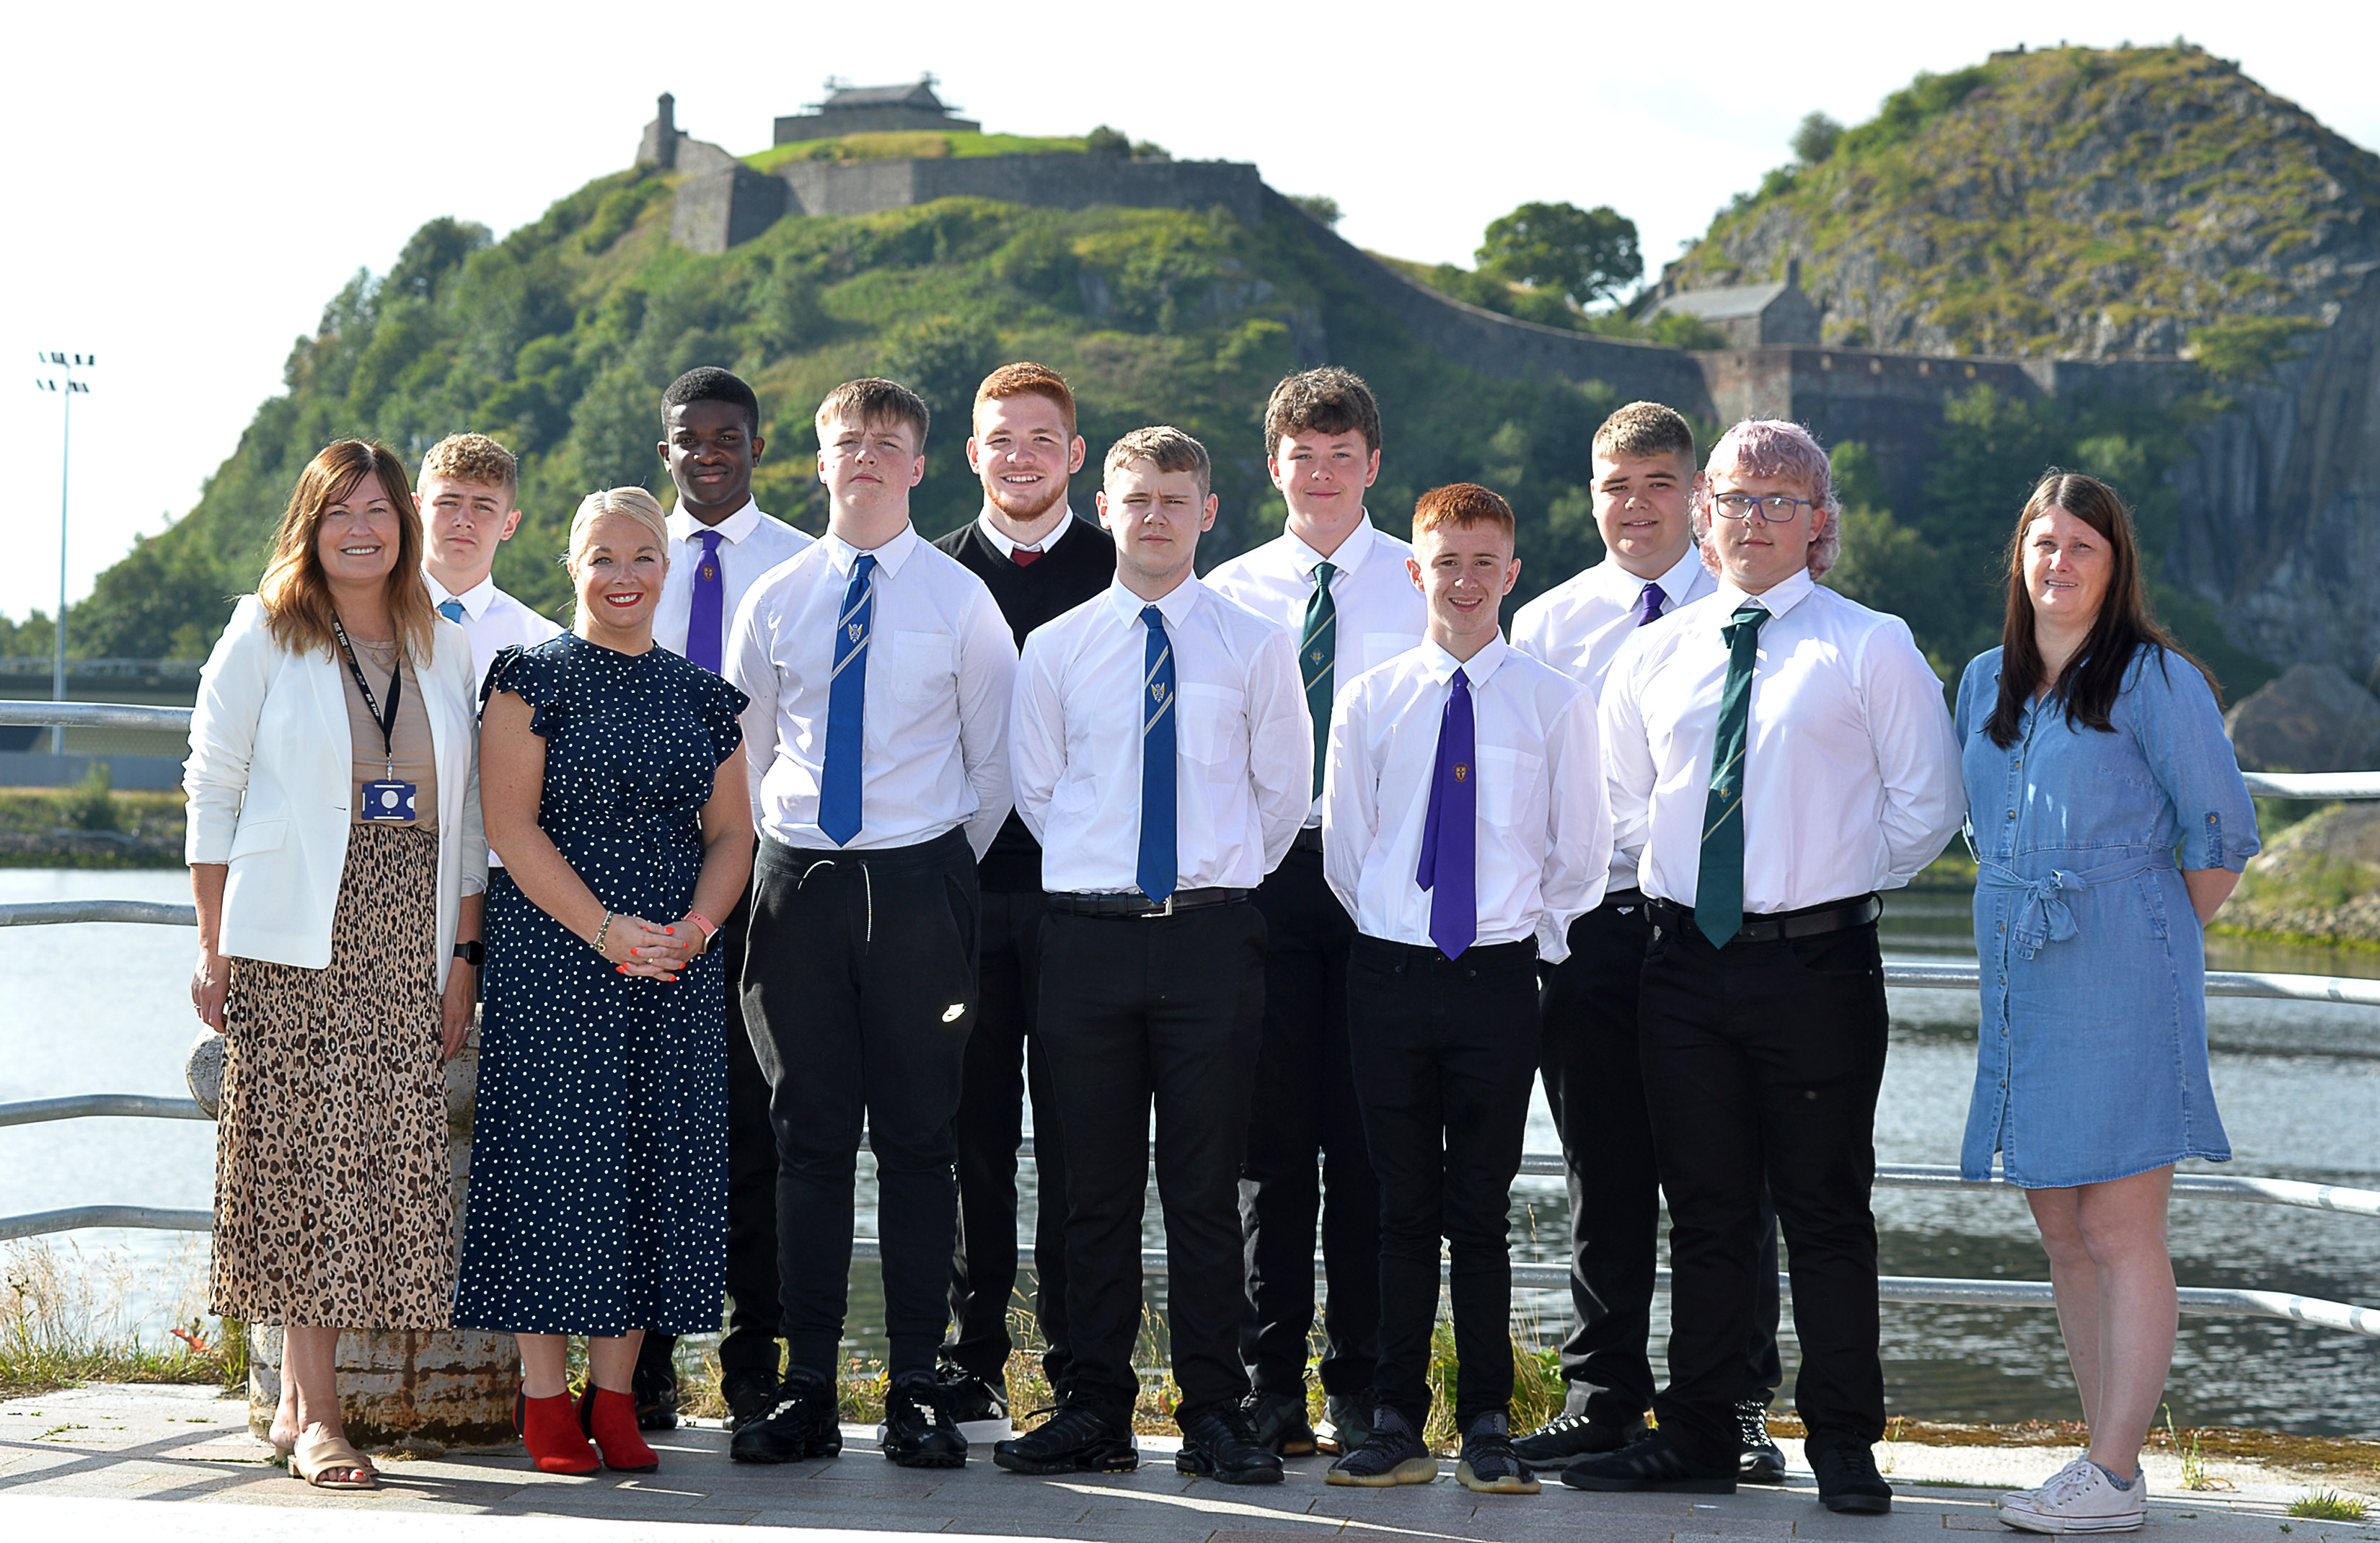 Pupils recruited to innovative hybrid apprenticeship pilot with major local employer